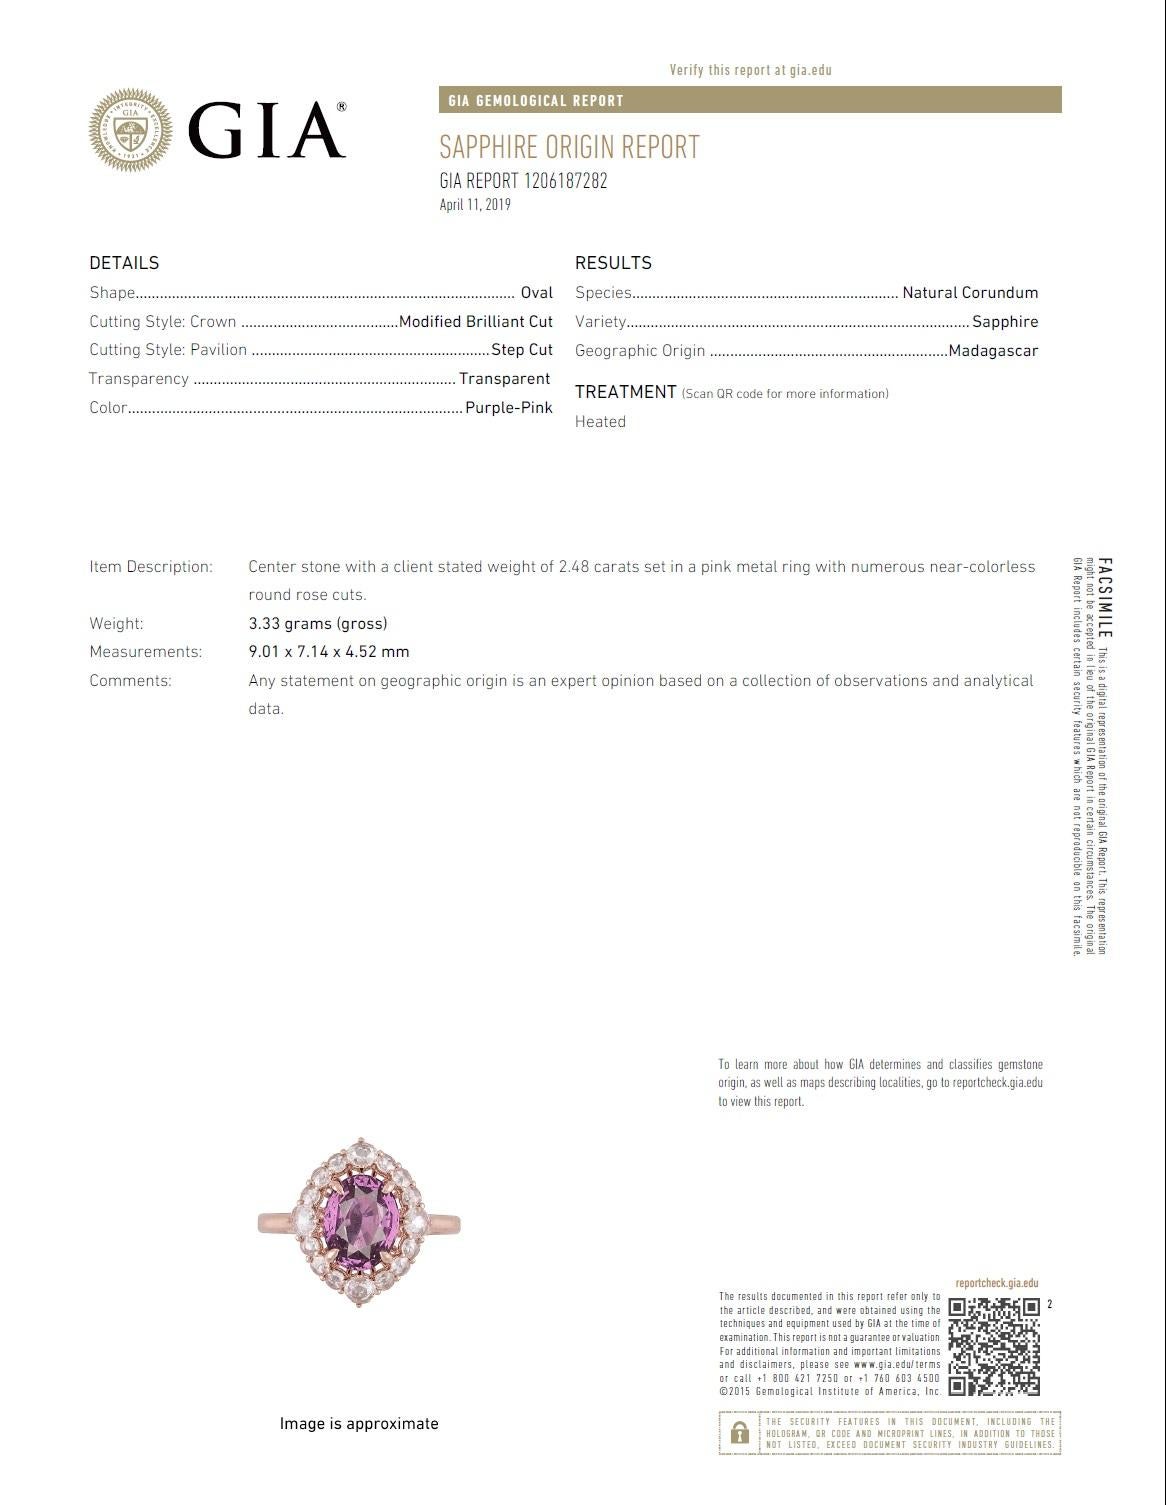 With a GIA Certified 2.48 carat oval cut exotic pink sapphire center, set inside a halo of rose cut white diamonds (total diamond weight 0.47 carats), this ring shines from every angle.

GIA Certification details (see photo):
The center sapphire is